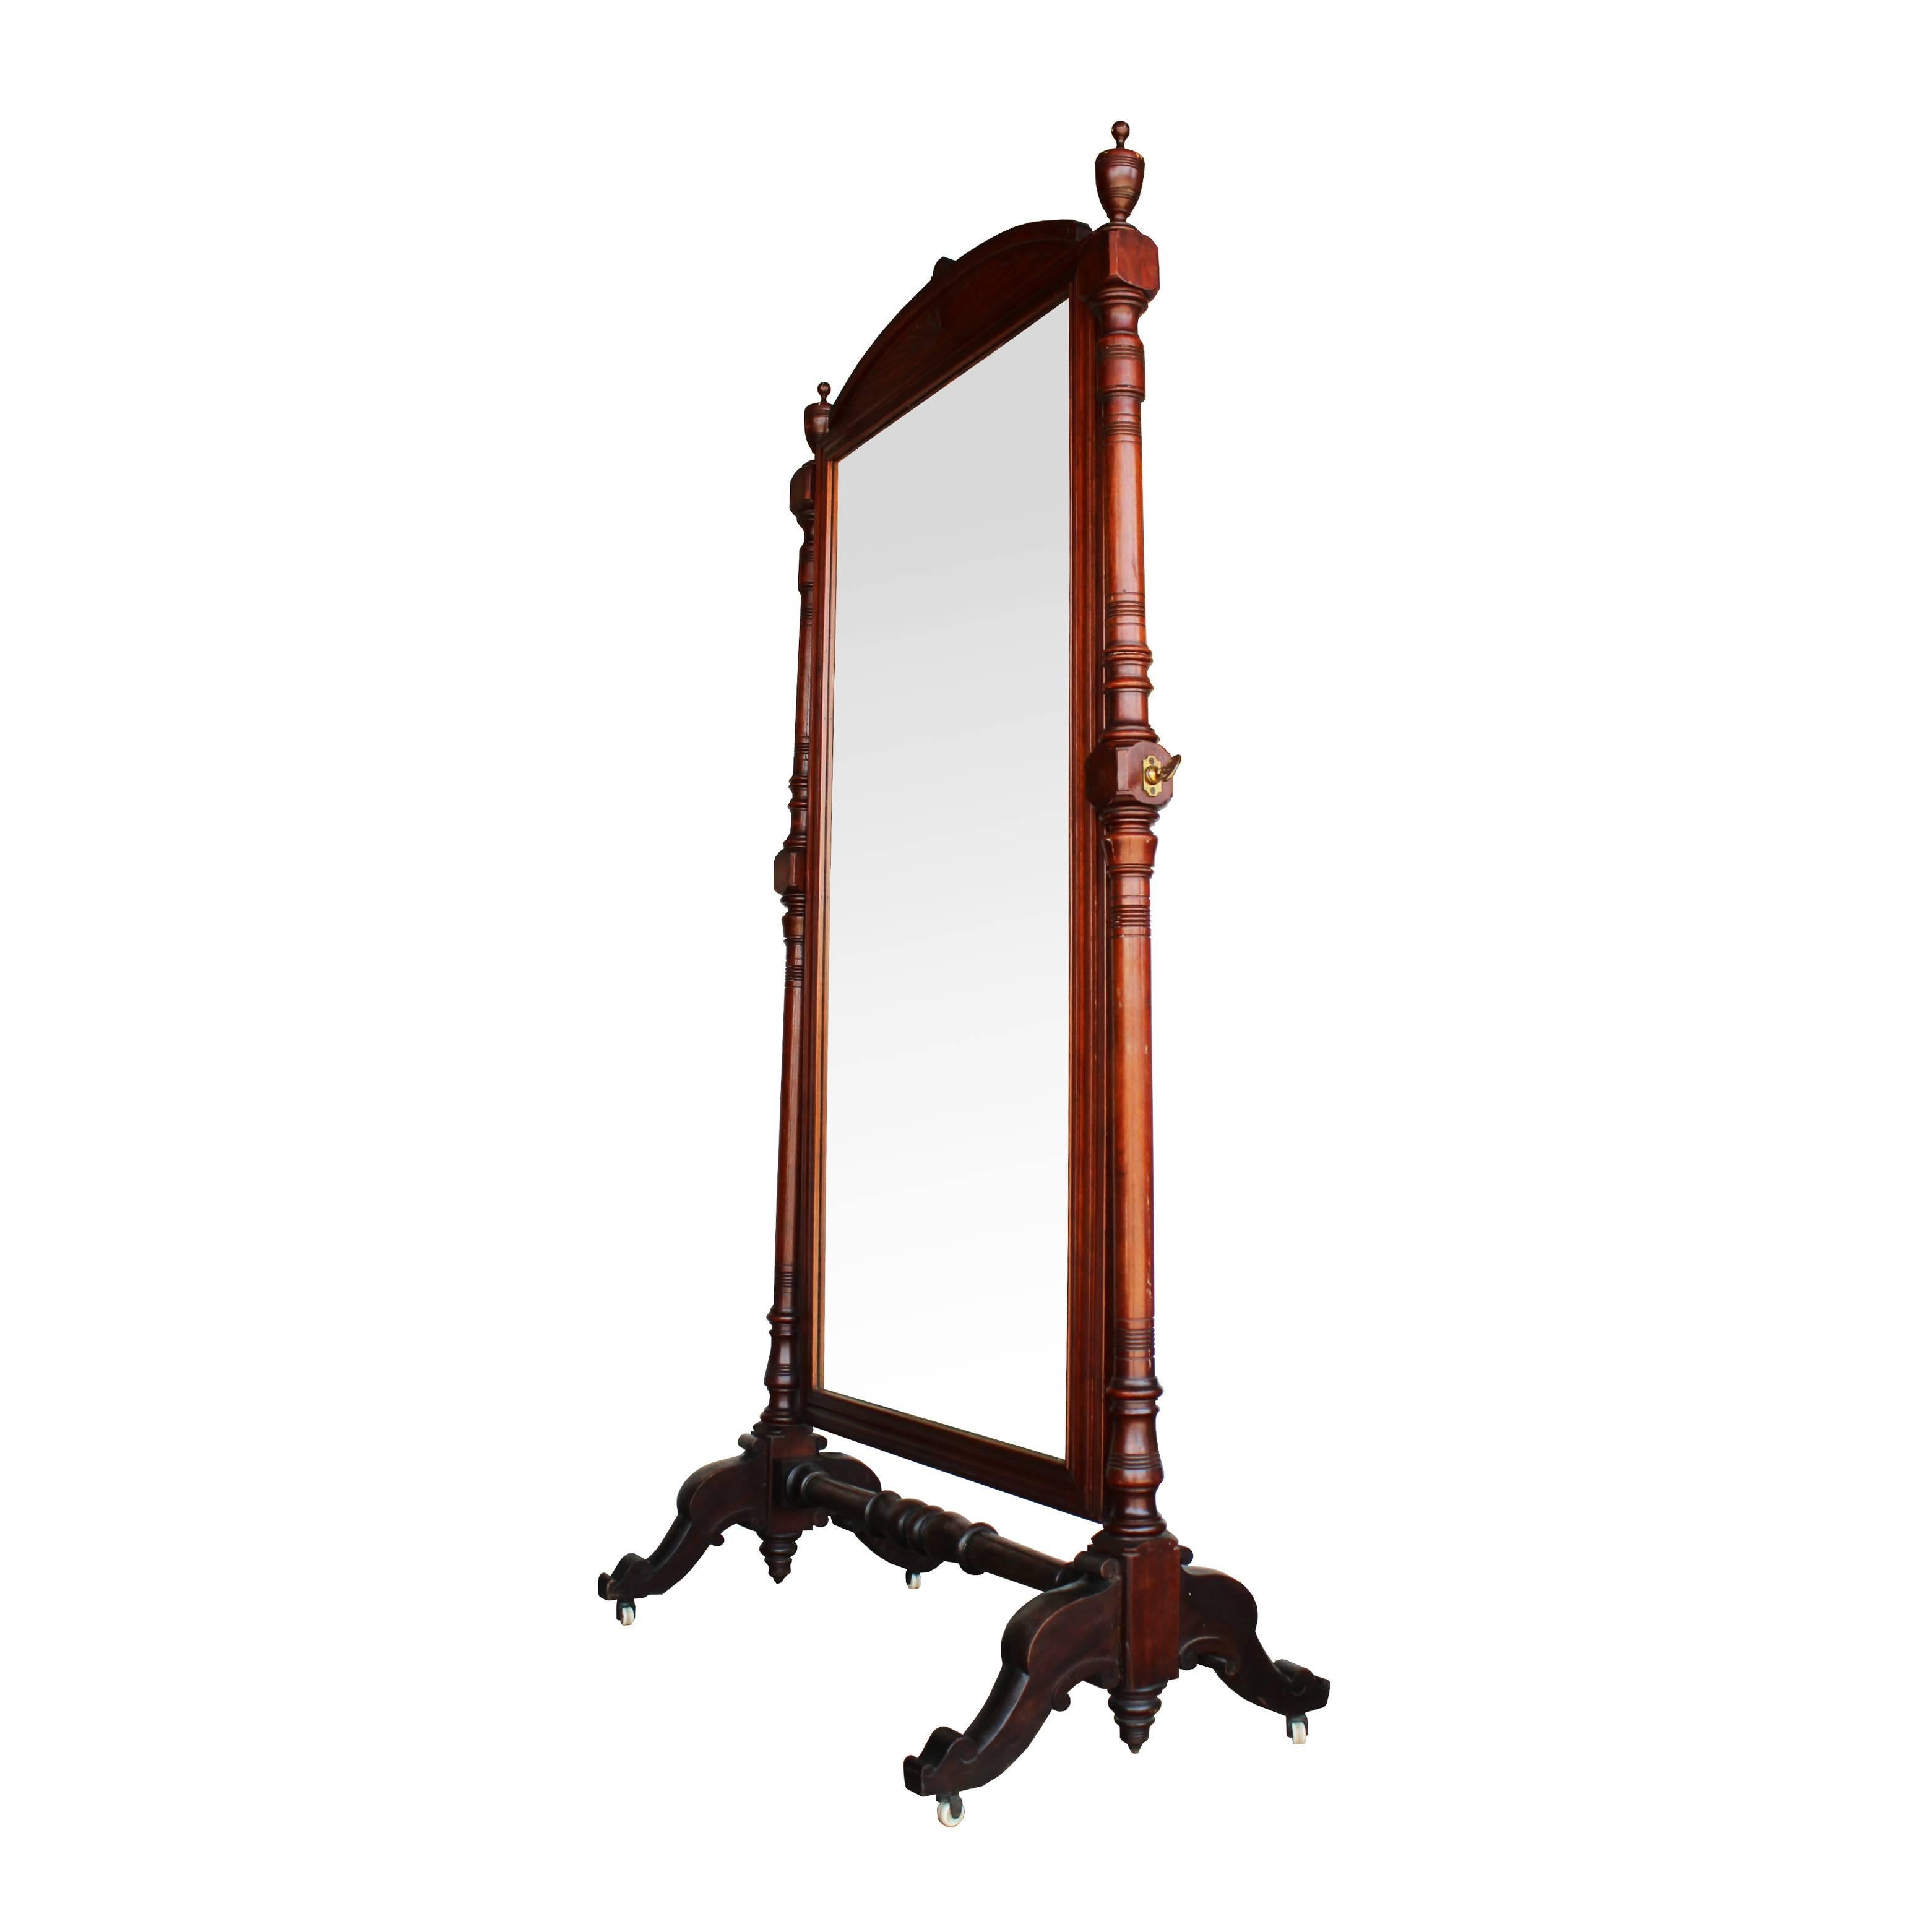 This elegant late 19th century mahogany cheval mirror features plenty of turned details on each supporting arm, brass hardware, and four porcelain casters for mobility. Urn finials and an arched header add flourished of additional detail to this